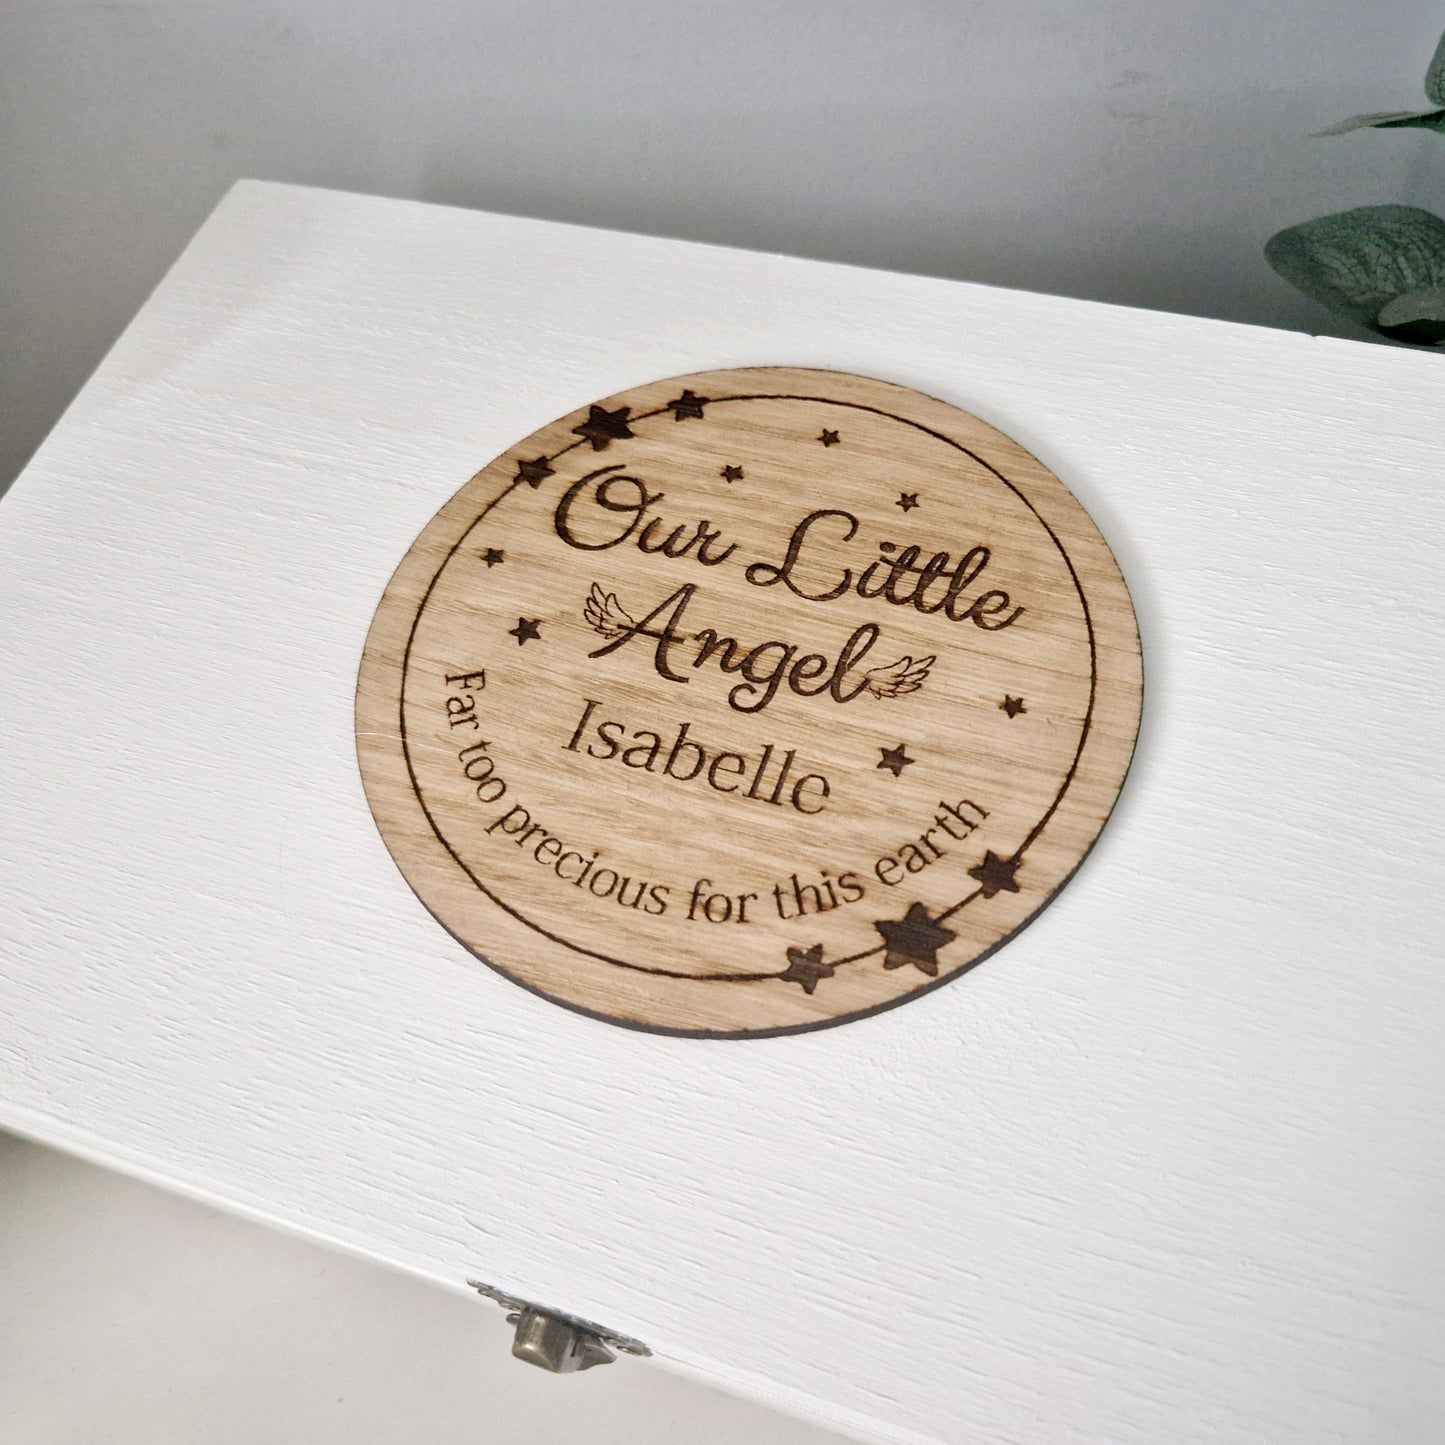 Baby Loss Memory Box- Our Little Angel